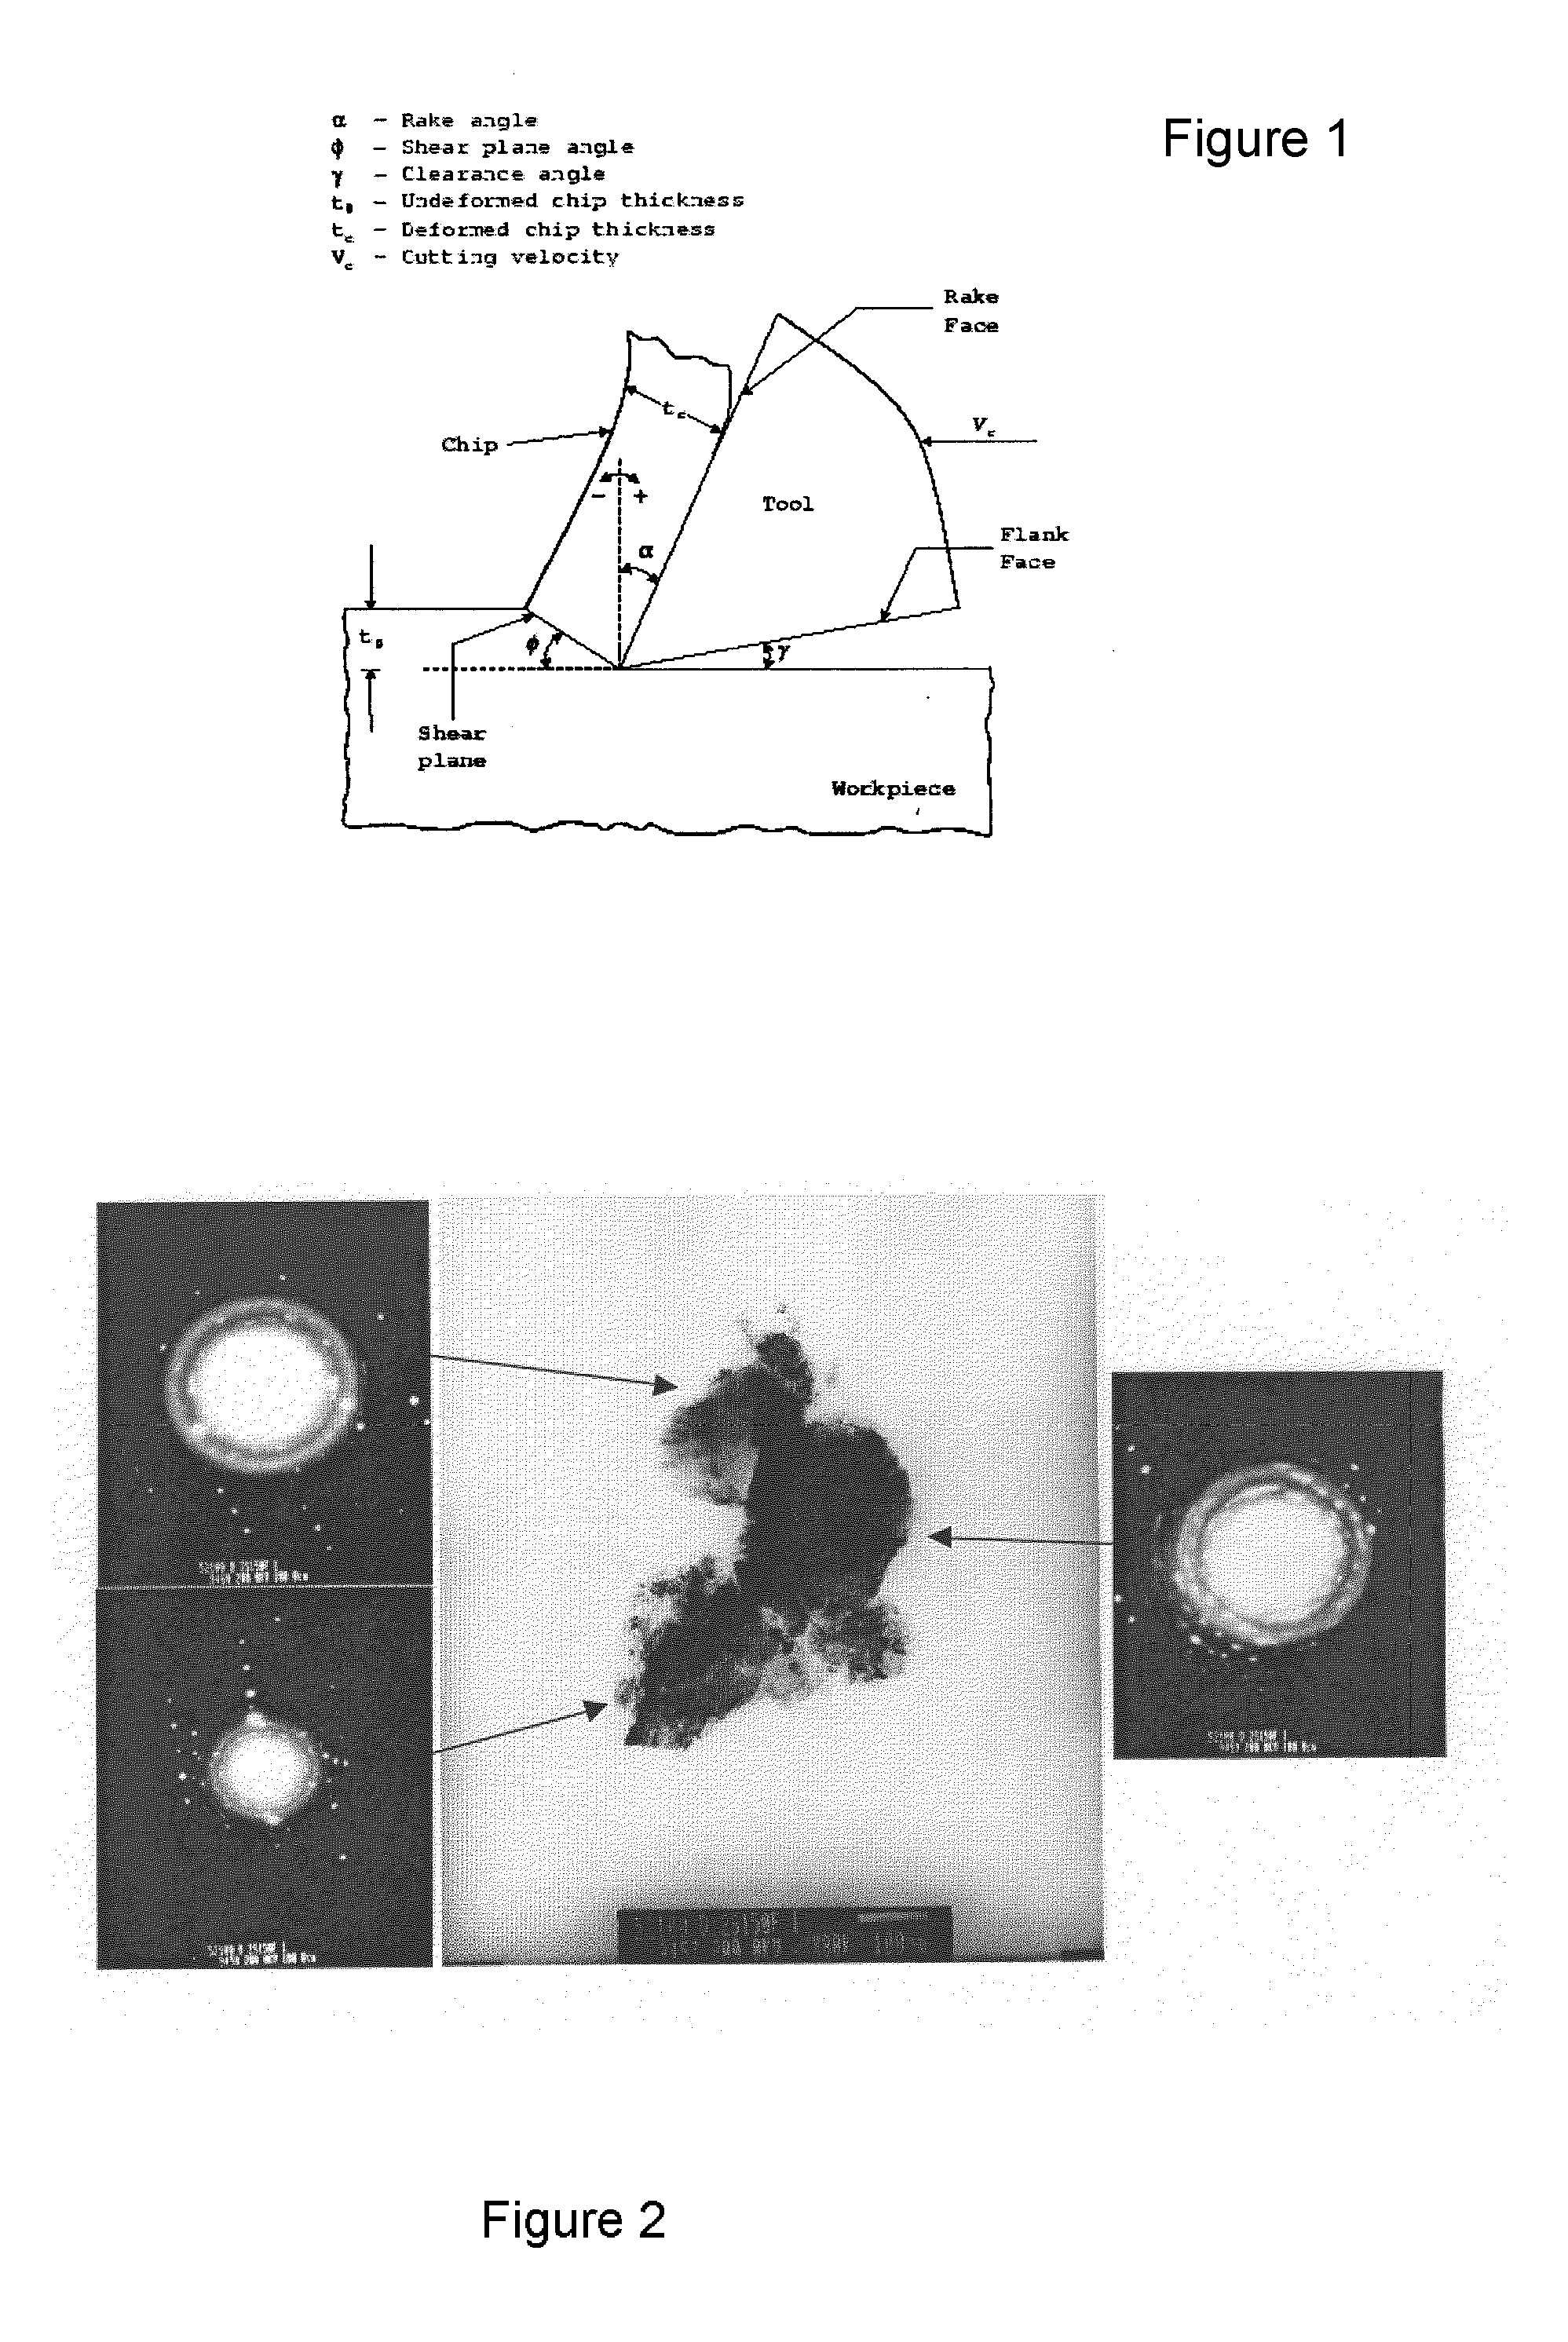 Method of consolidating precipitation-hardenable alloys to form consolidated articles with ultra-fine grain microstructures